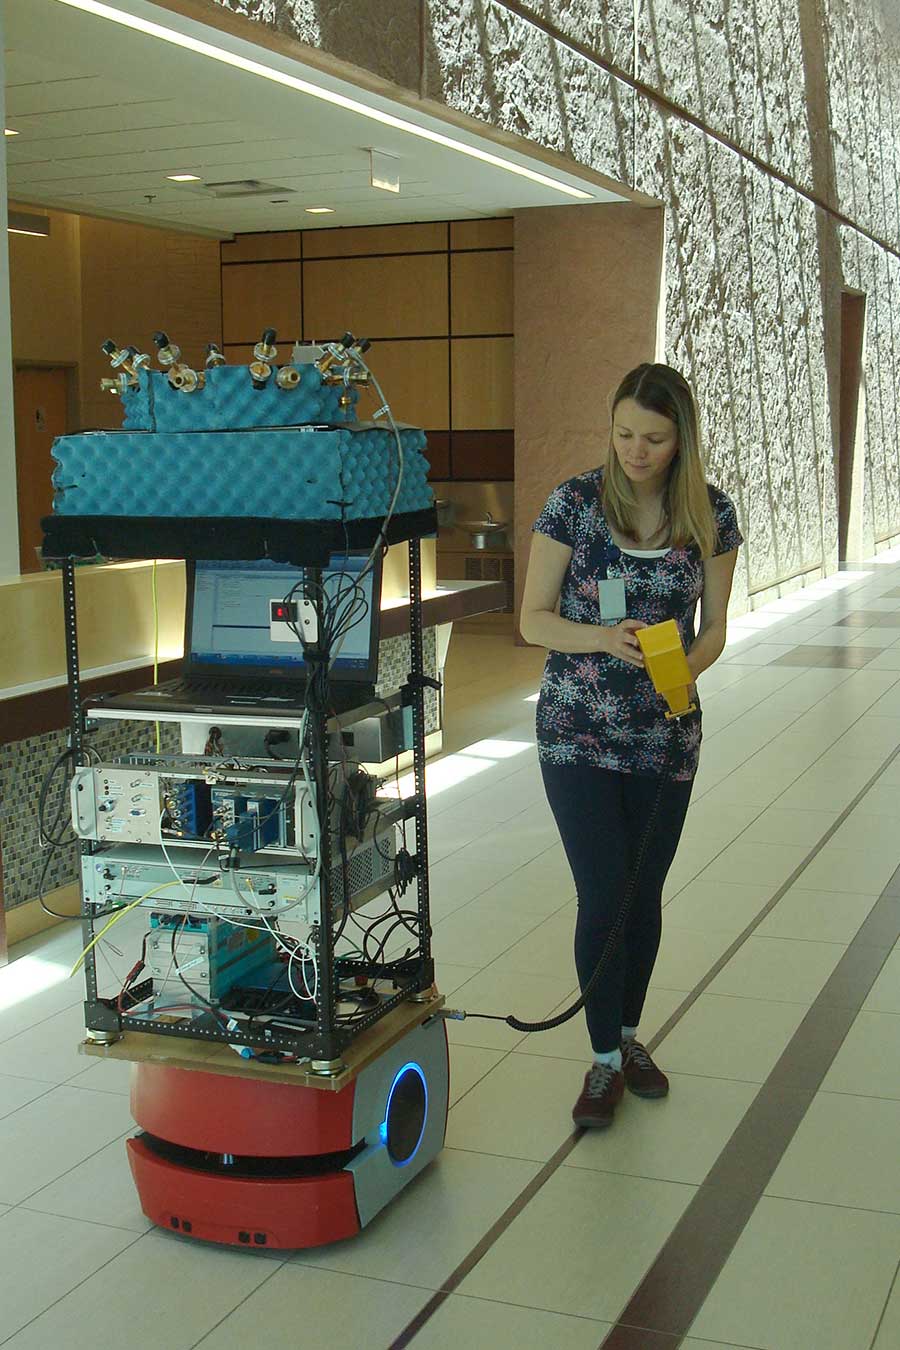 NIST researcher Jelena Senic drives a robot used to measure the performance of different antenna beam patterns. The mobile platform enables researchers to position a wireless channel sounder that includes (top to bottom) an array of 16 receive antennas, the receiver, timing circuitry, a signal digitizer and a battery for untethered field operations. Credit: NIST